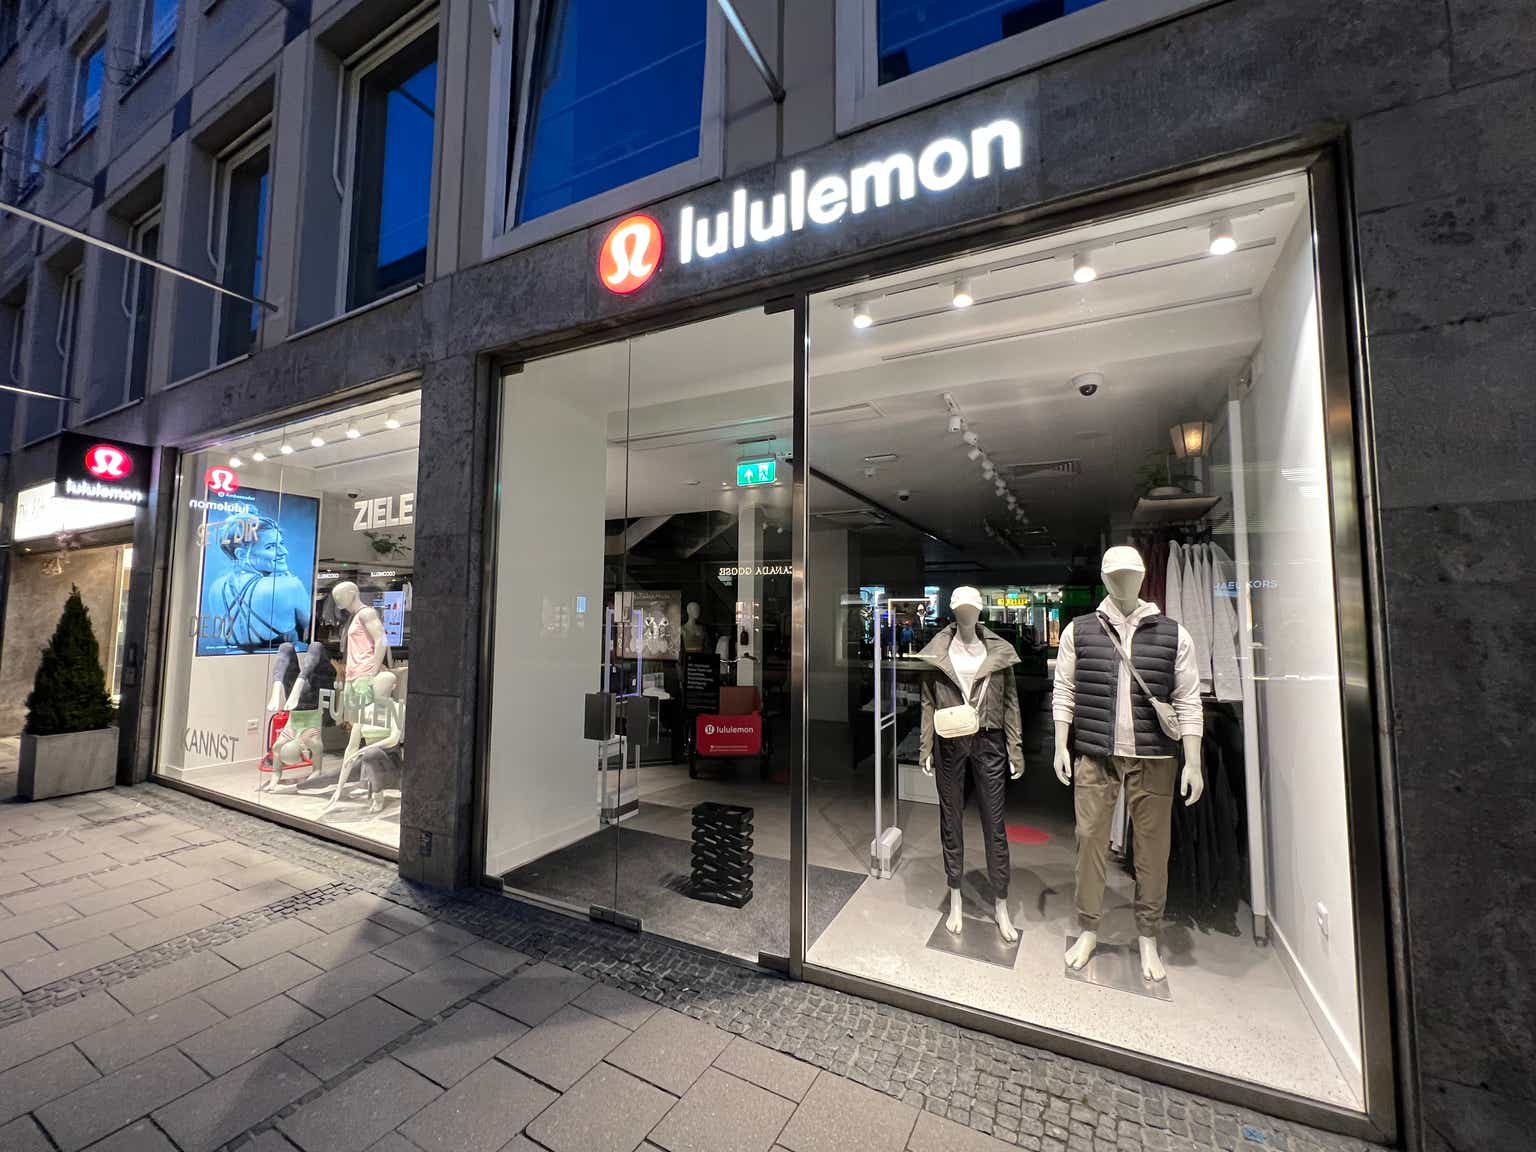 Lululemon Stock: Things Could Turn Sour In The Near Term (NASDAQ:LULU)